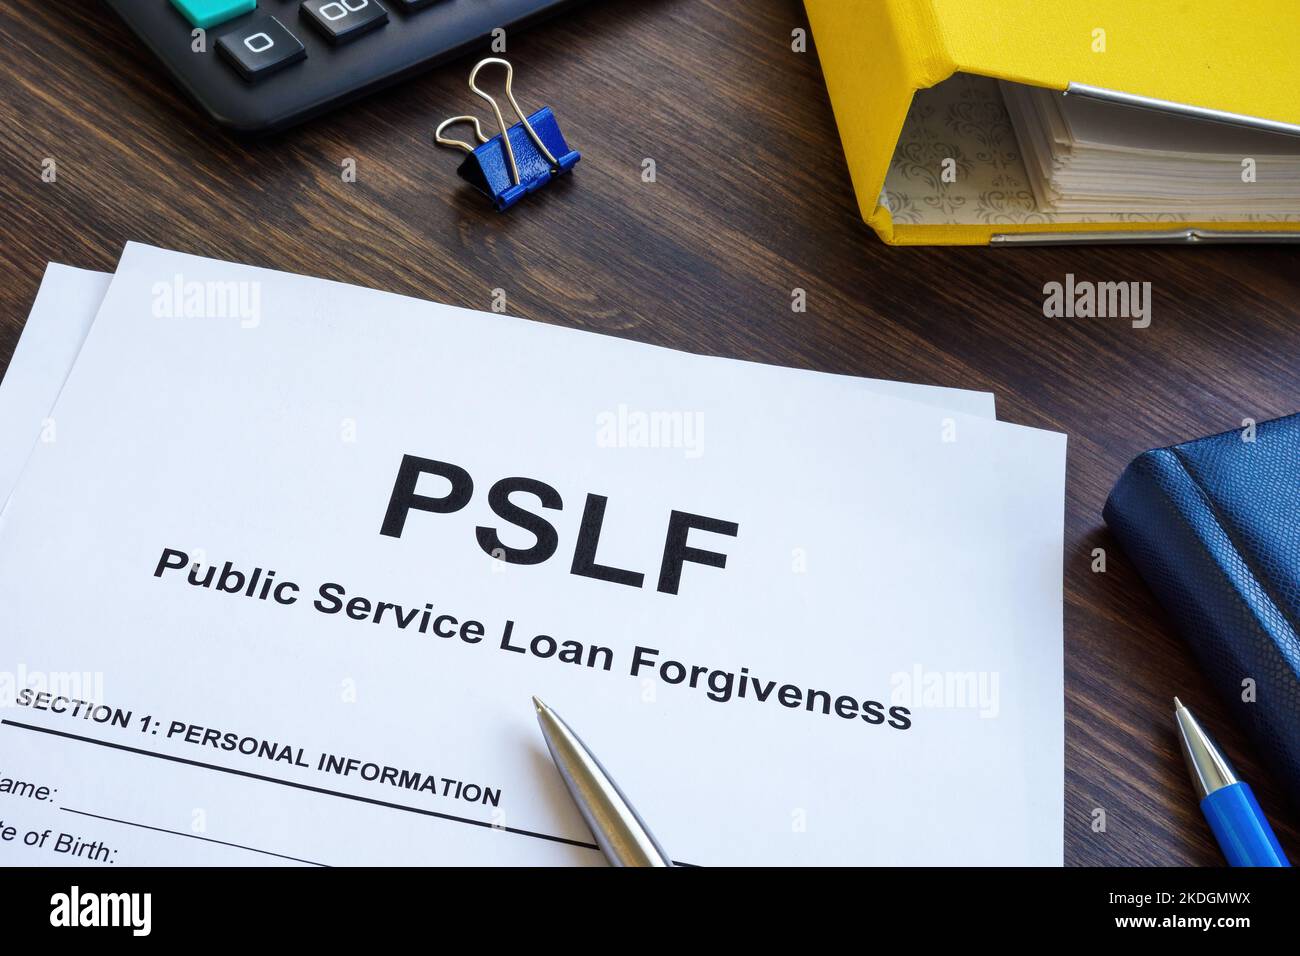 Papers foe Public Service Loan Forgiveness PSLF on the wooden surface. Stock Photo